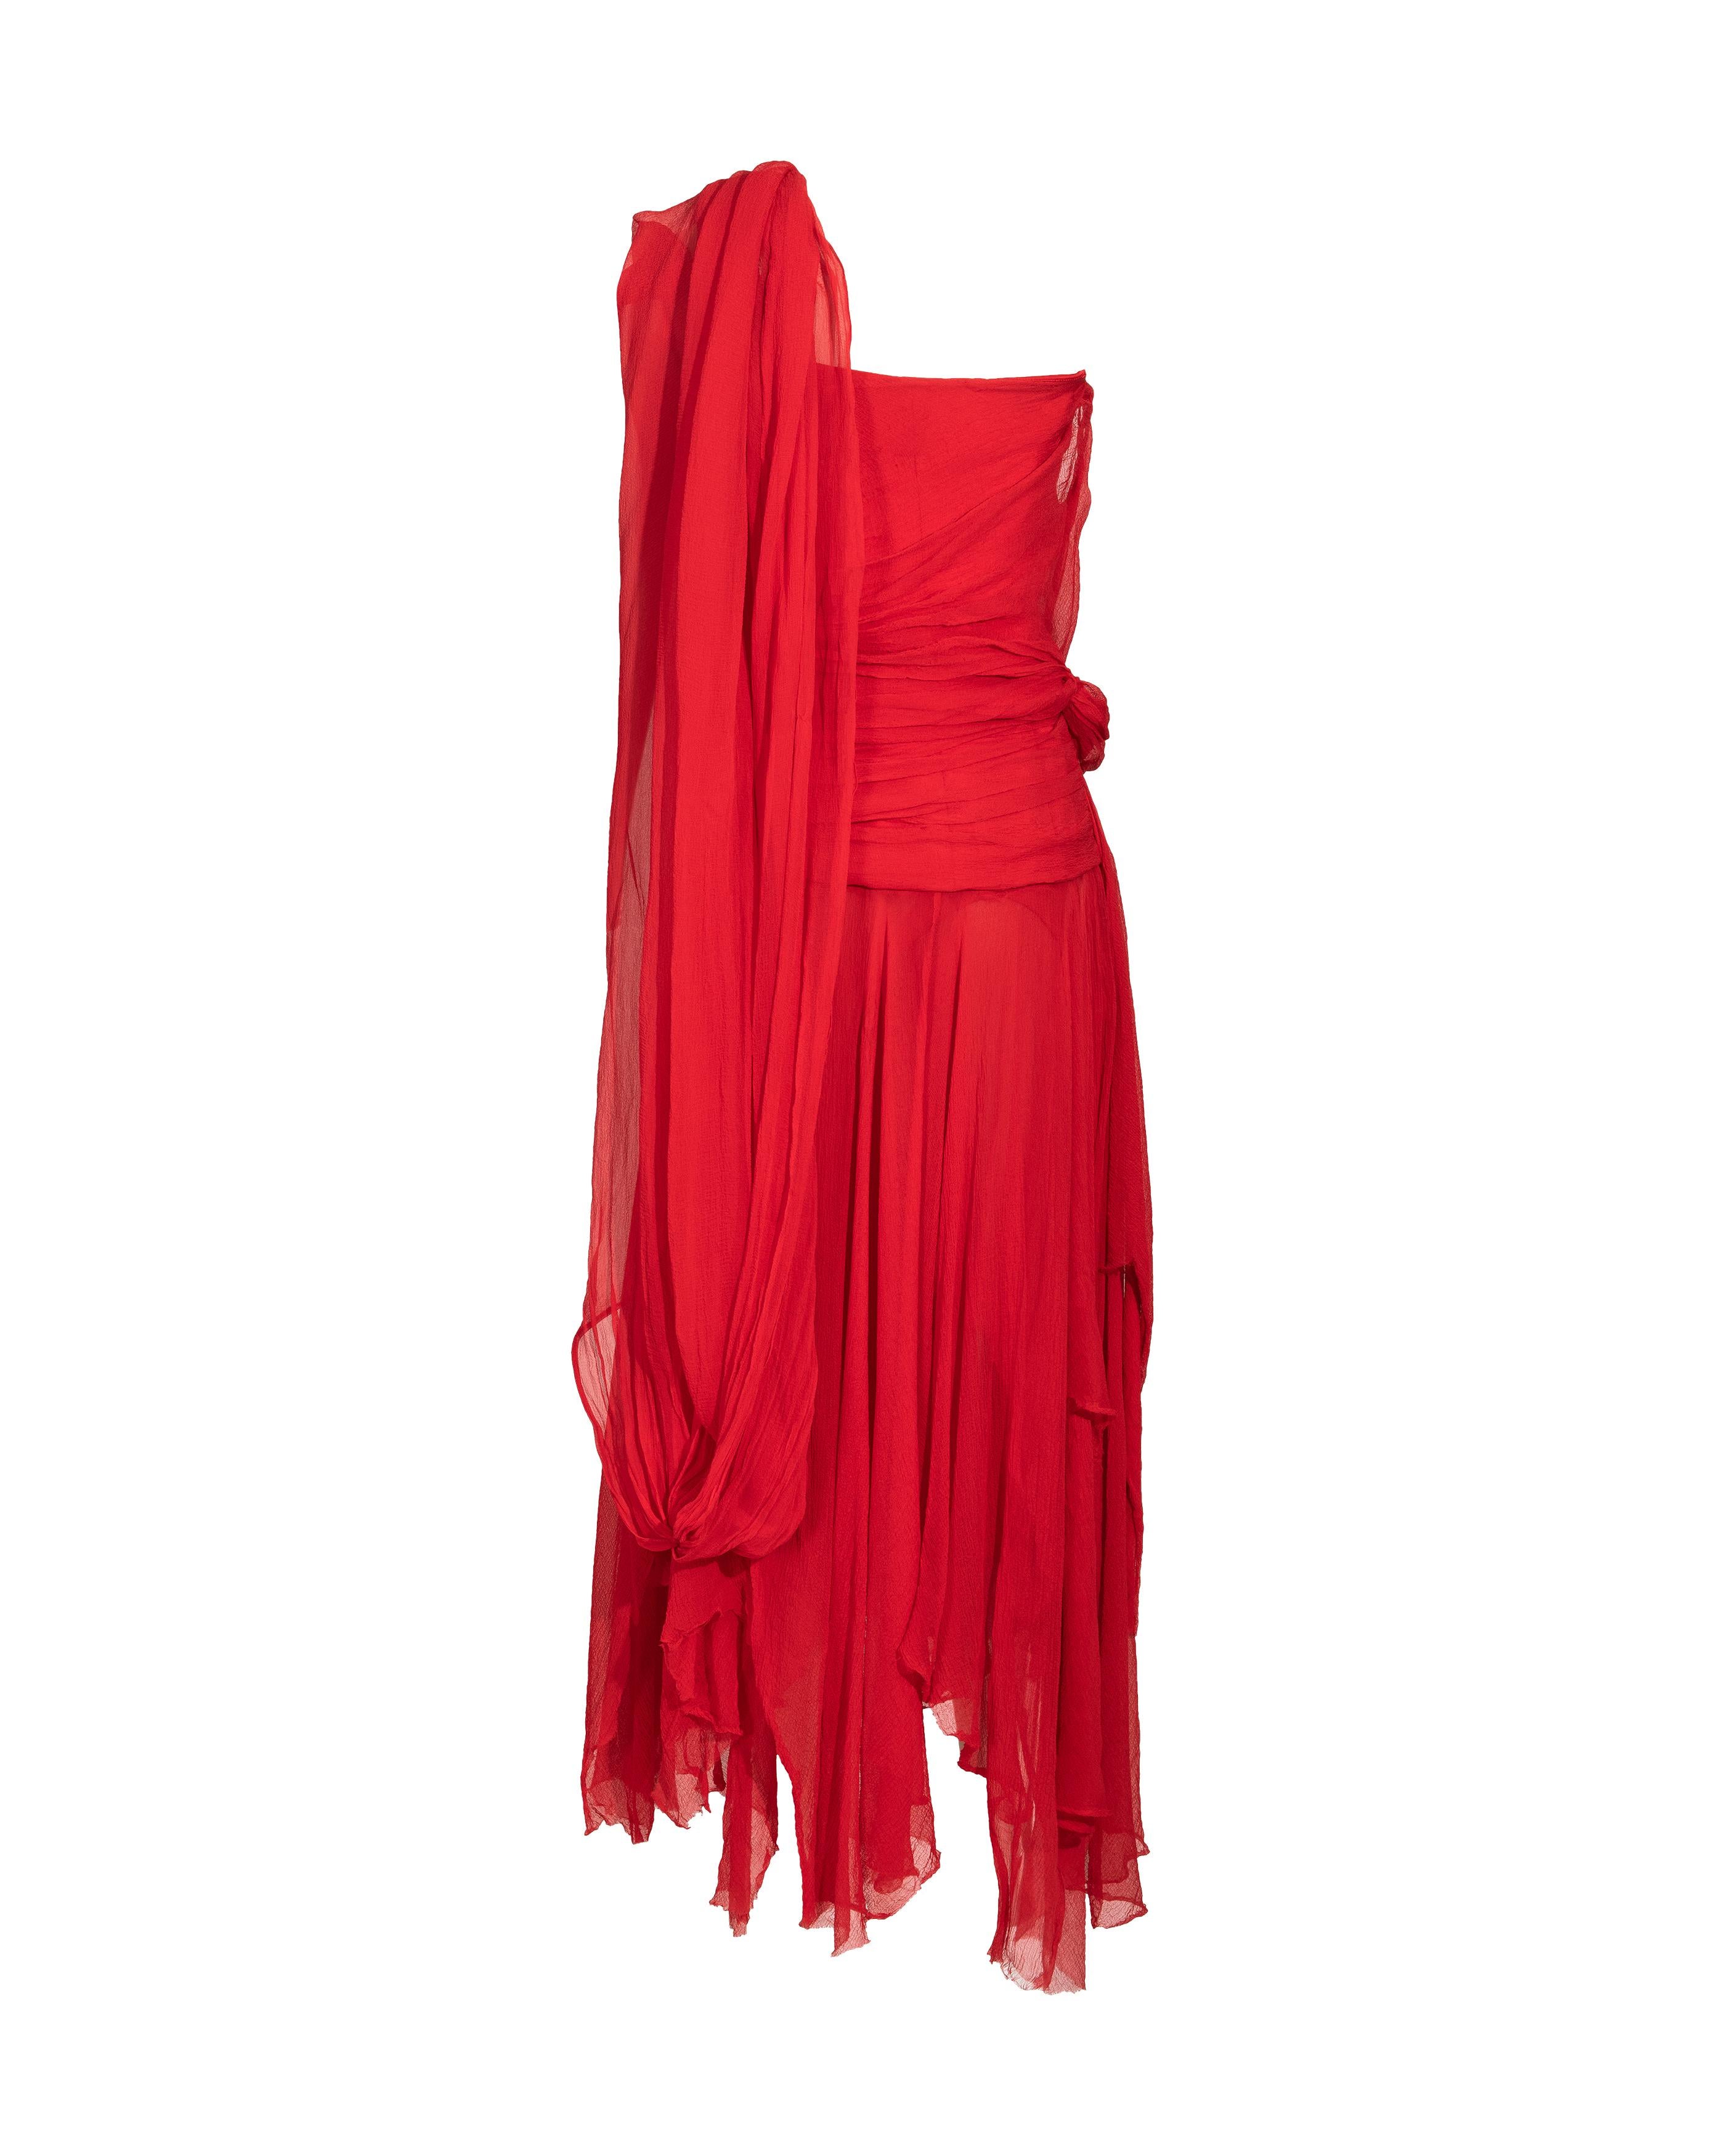 S/S 2003 Alexander McQueen  'Irere' Collection Red Silk Chiffon Gown with Sash For Sale 11